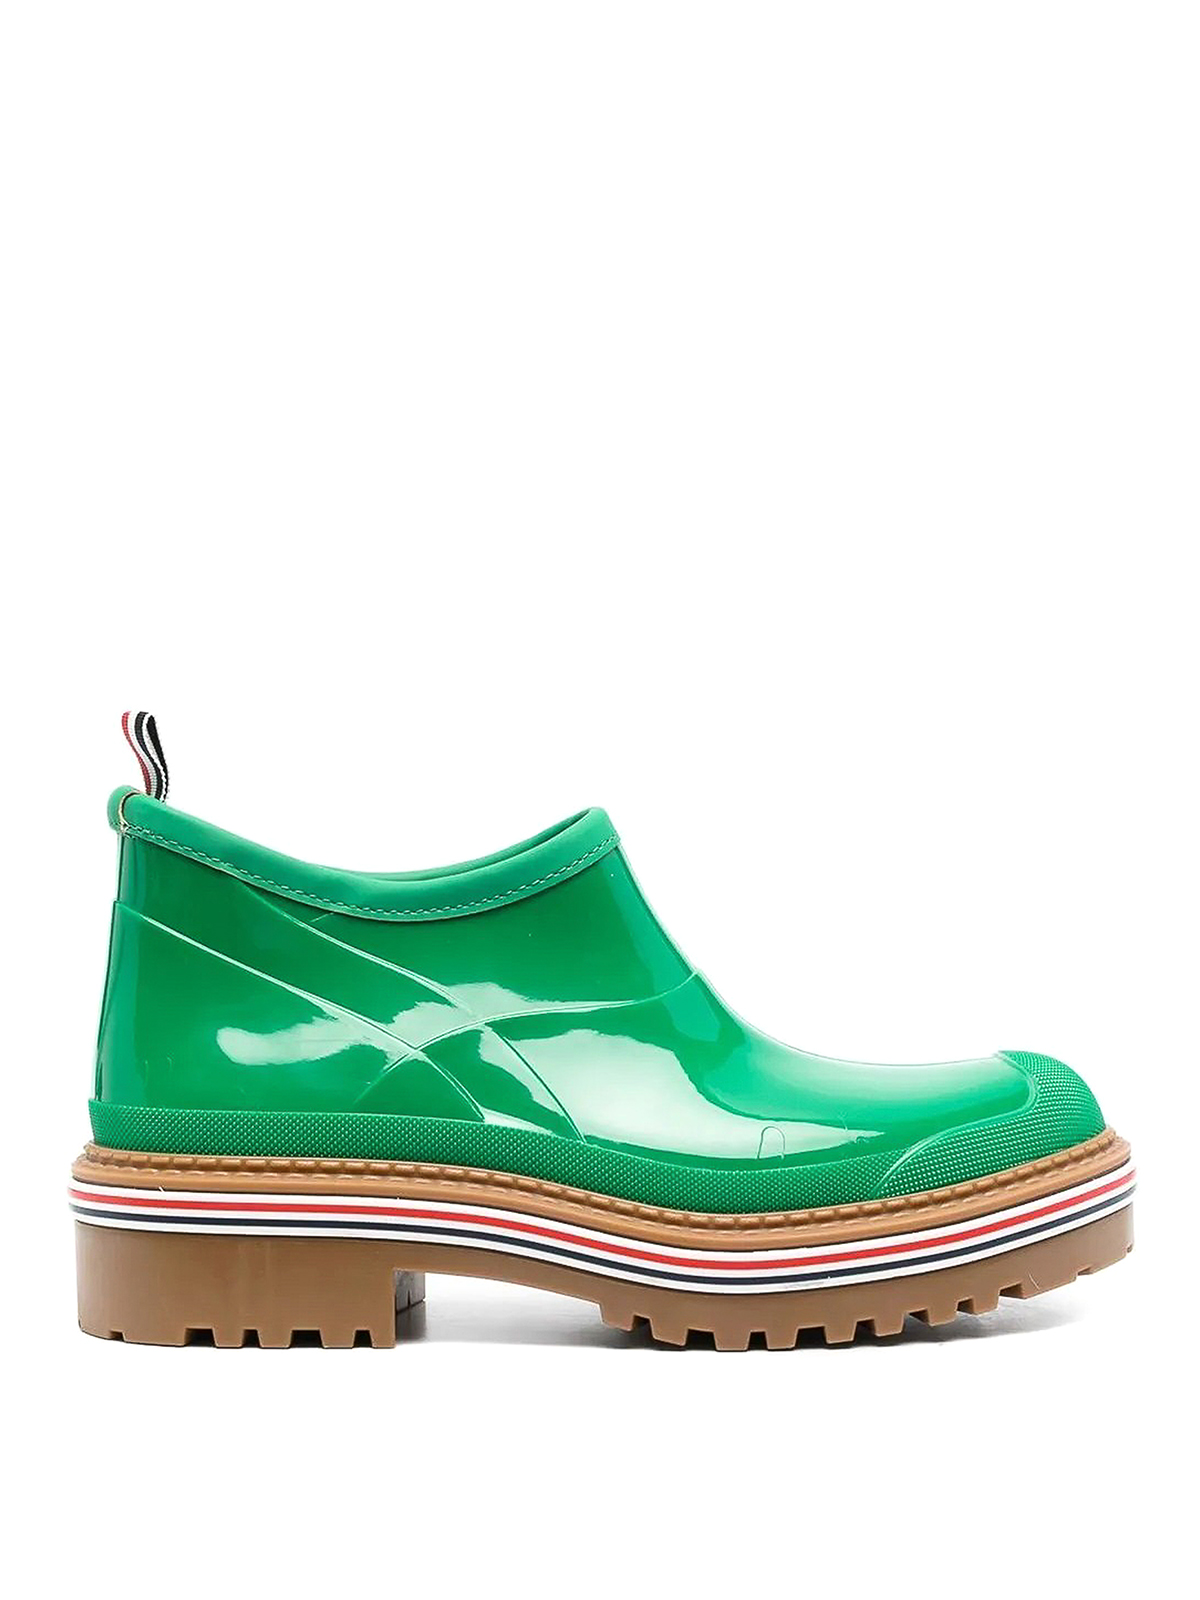 Thom Browne Round Toe Boots In Green